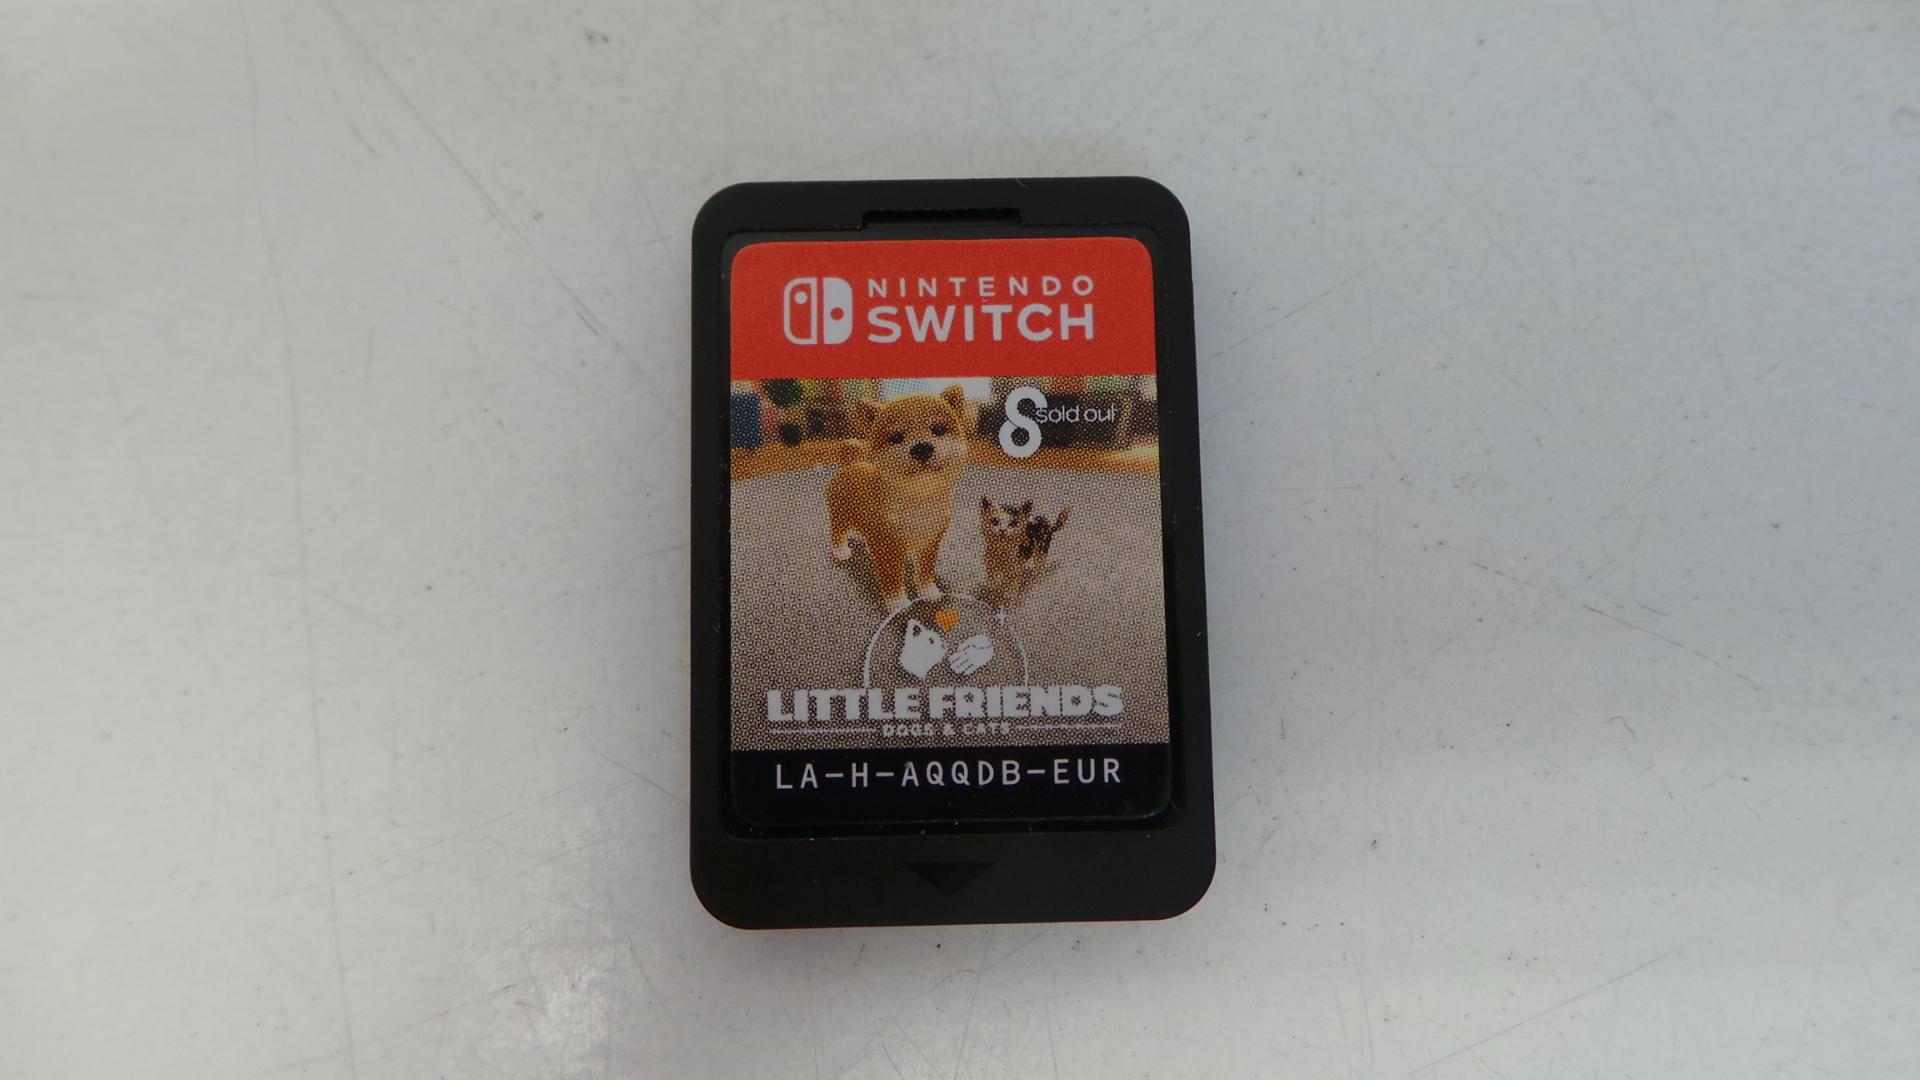 Sold Out Little Friends: Dogs & Cats - [Nintendo Switch] : : Games